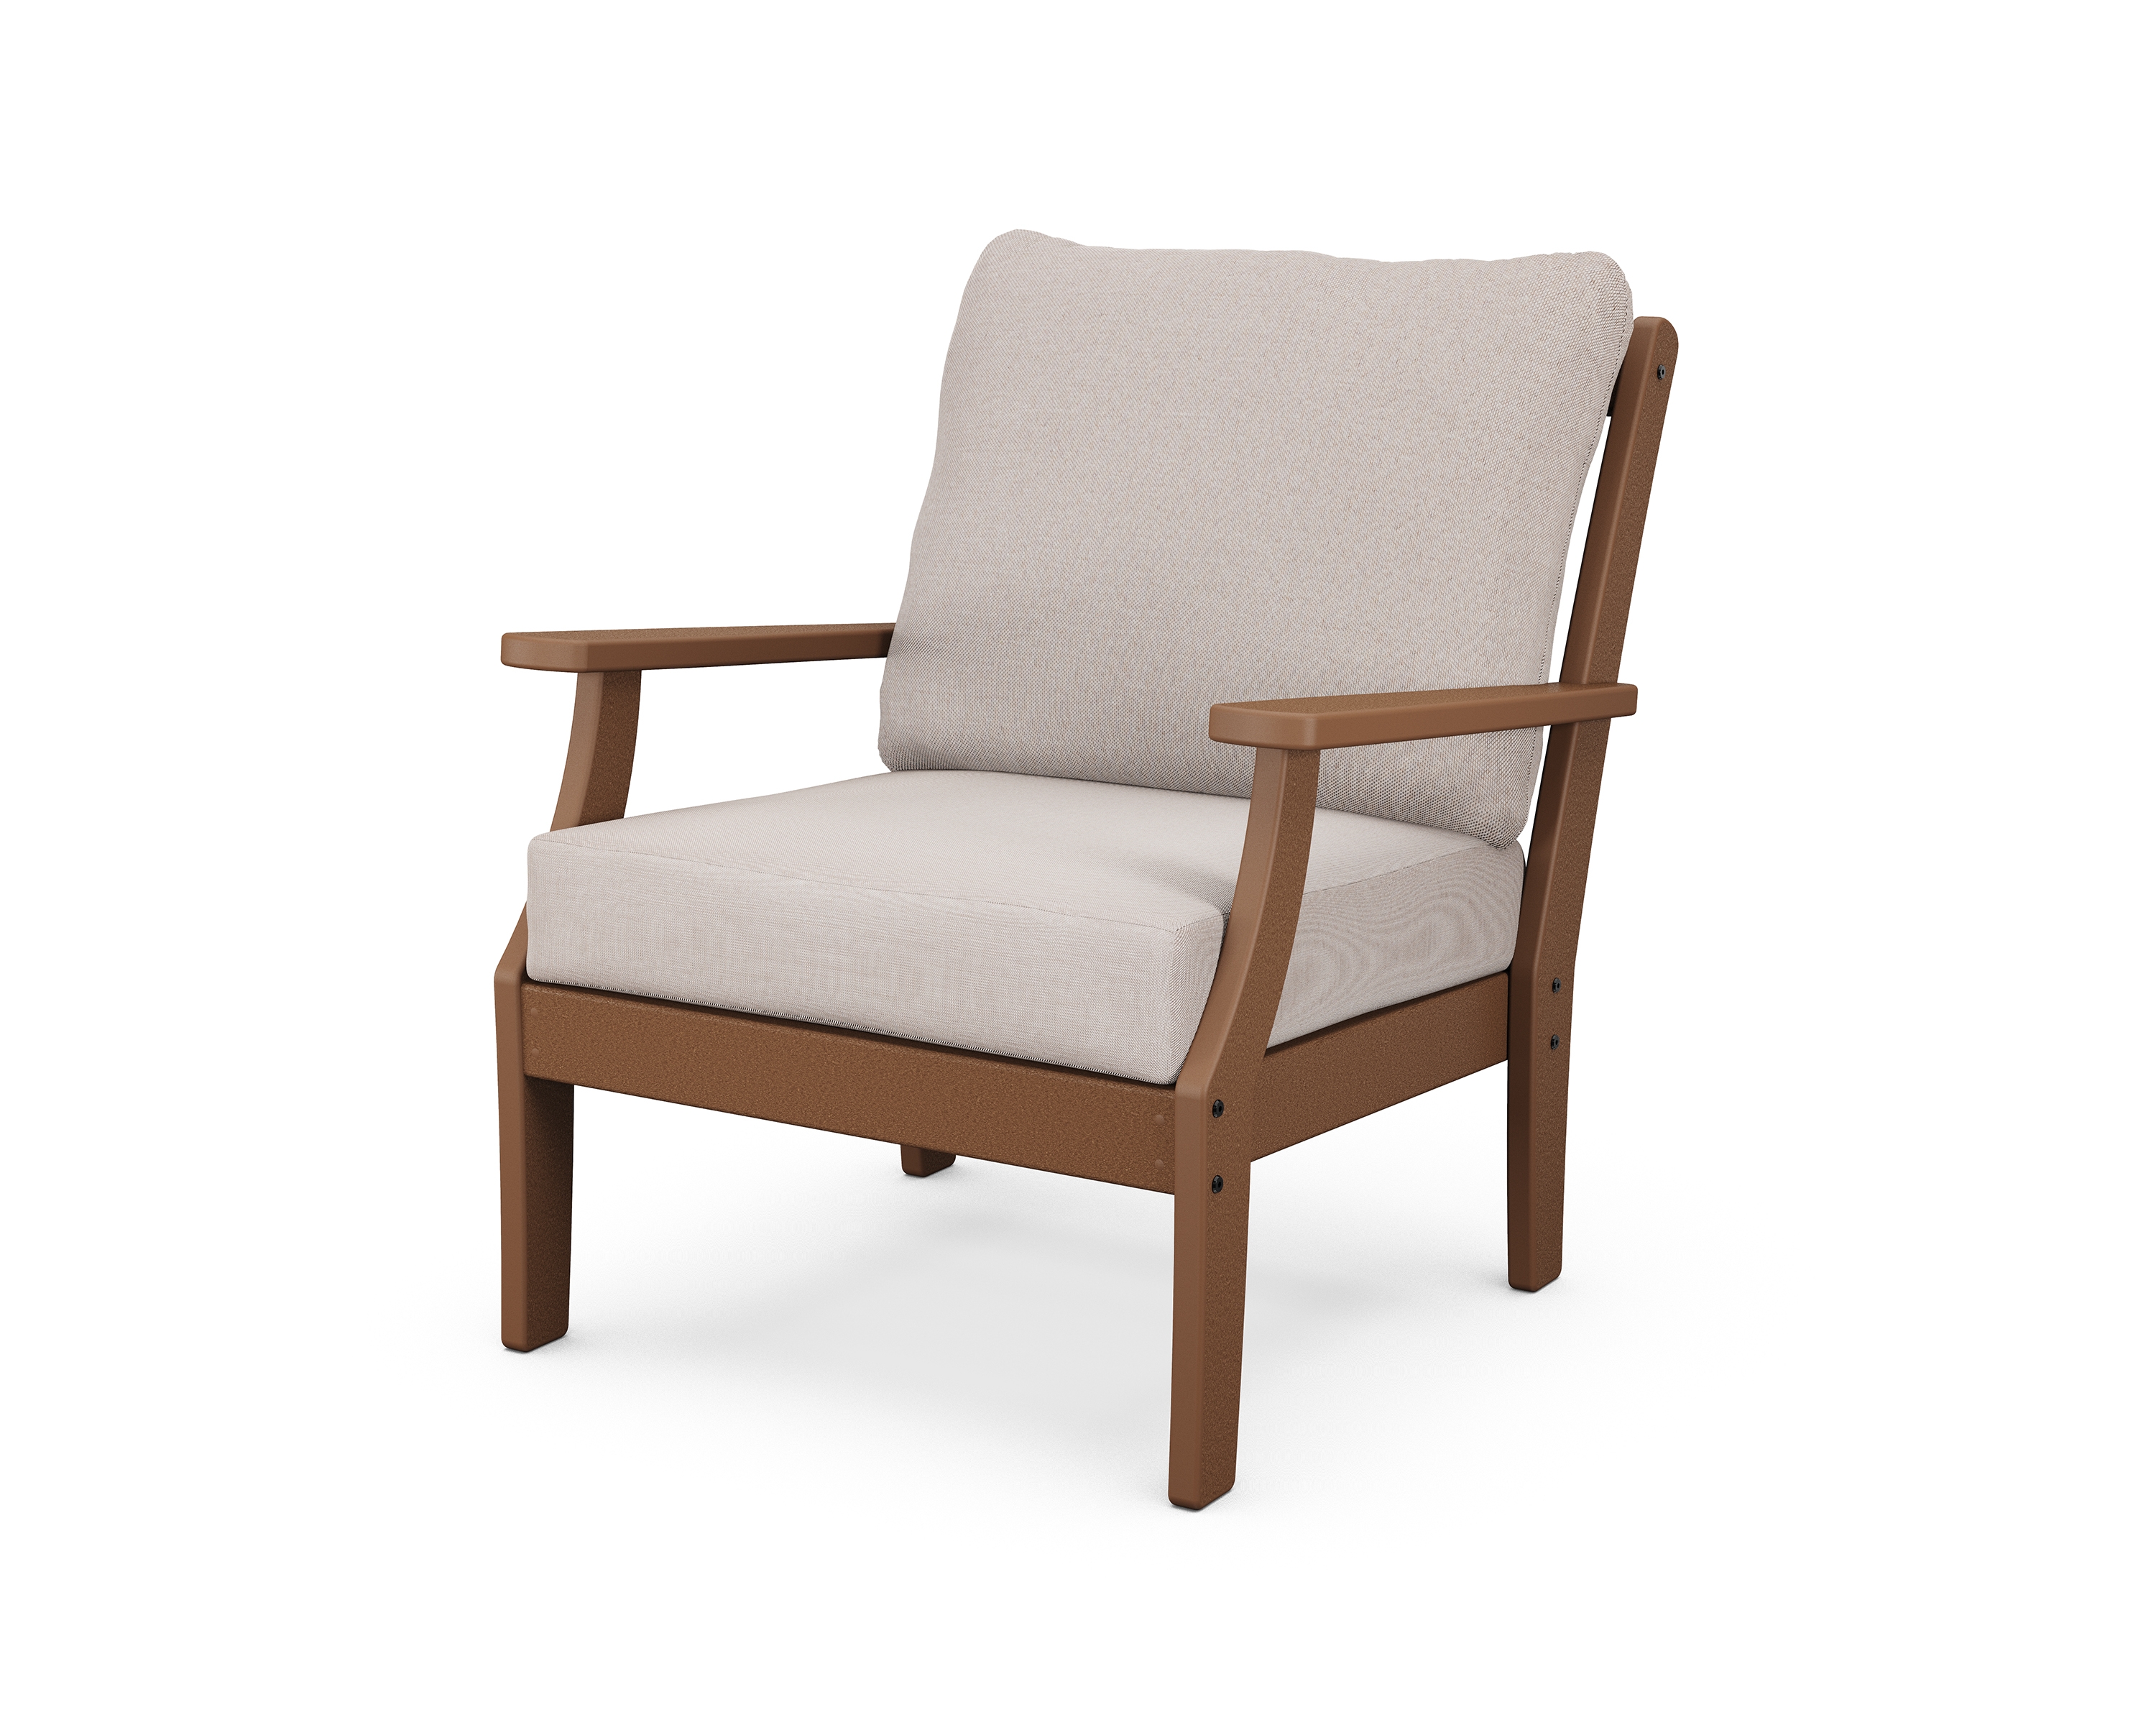 Trex® Outdoor Furniture™ Yacht Club Deep Seating Lounge Chair